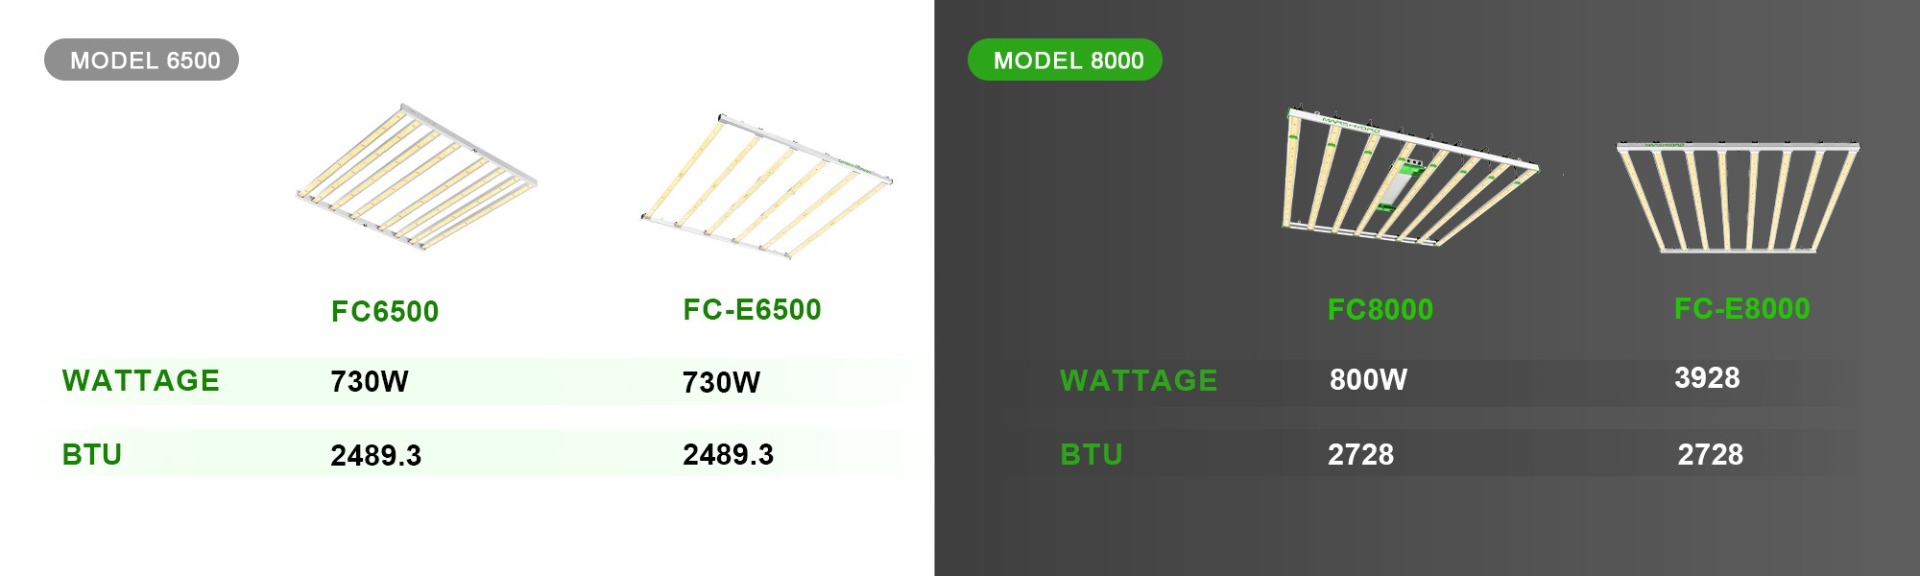 the wattage and btu is different between 6500 and 8000 led grow lights